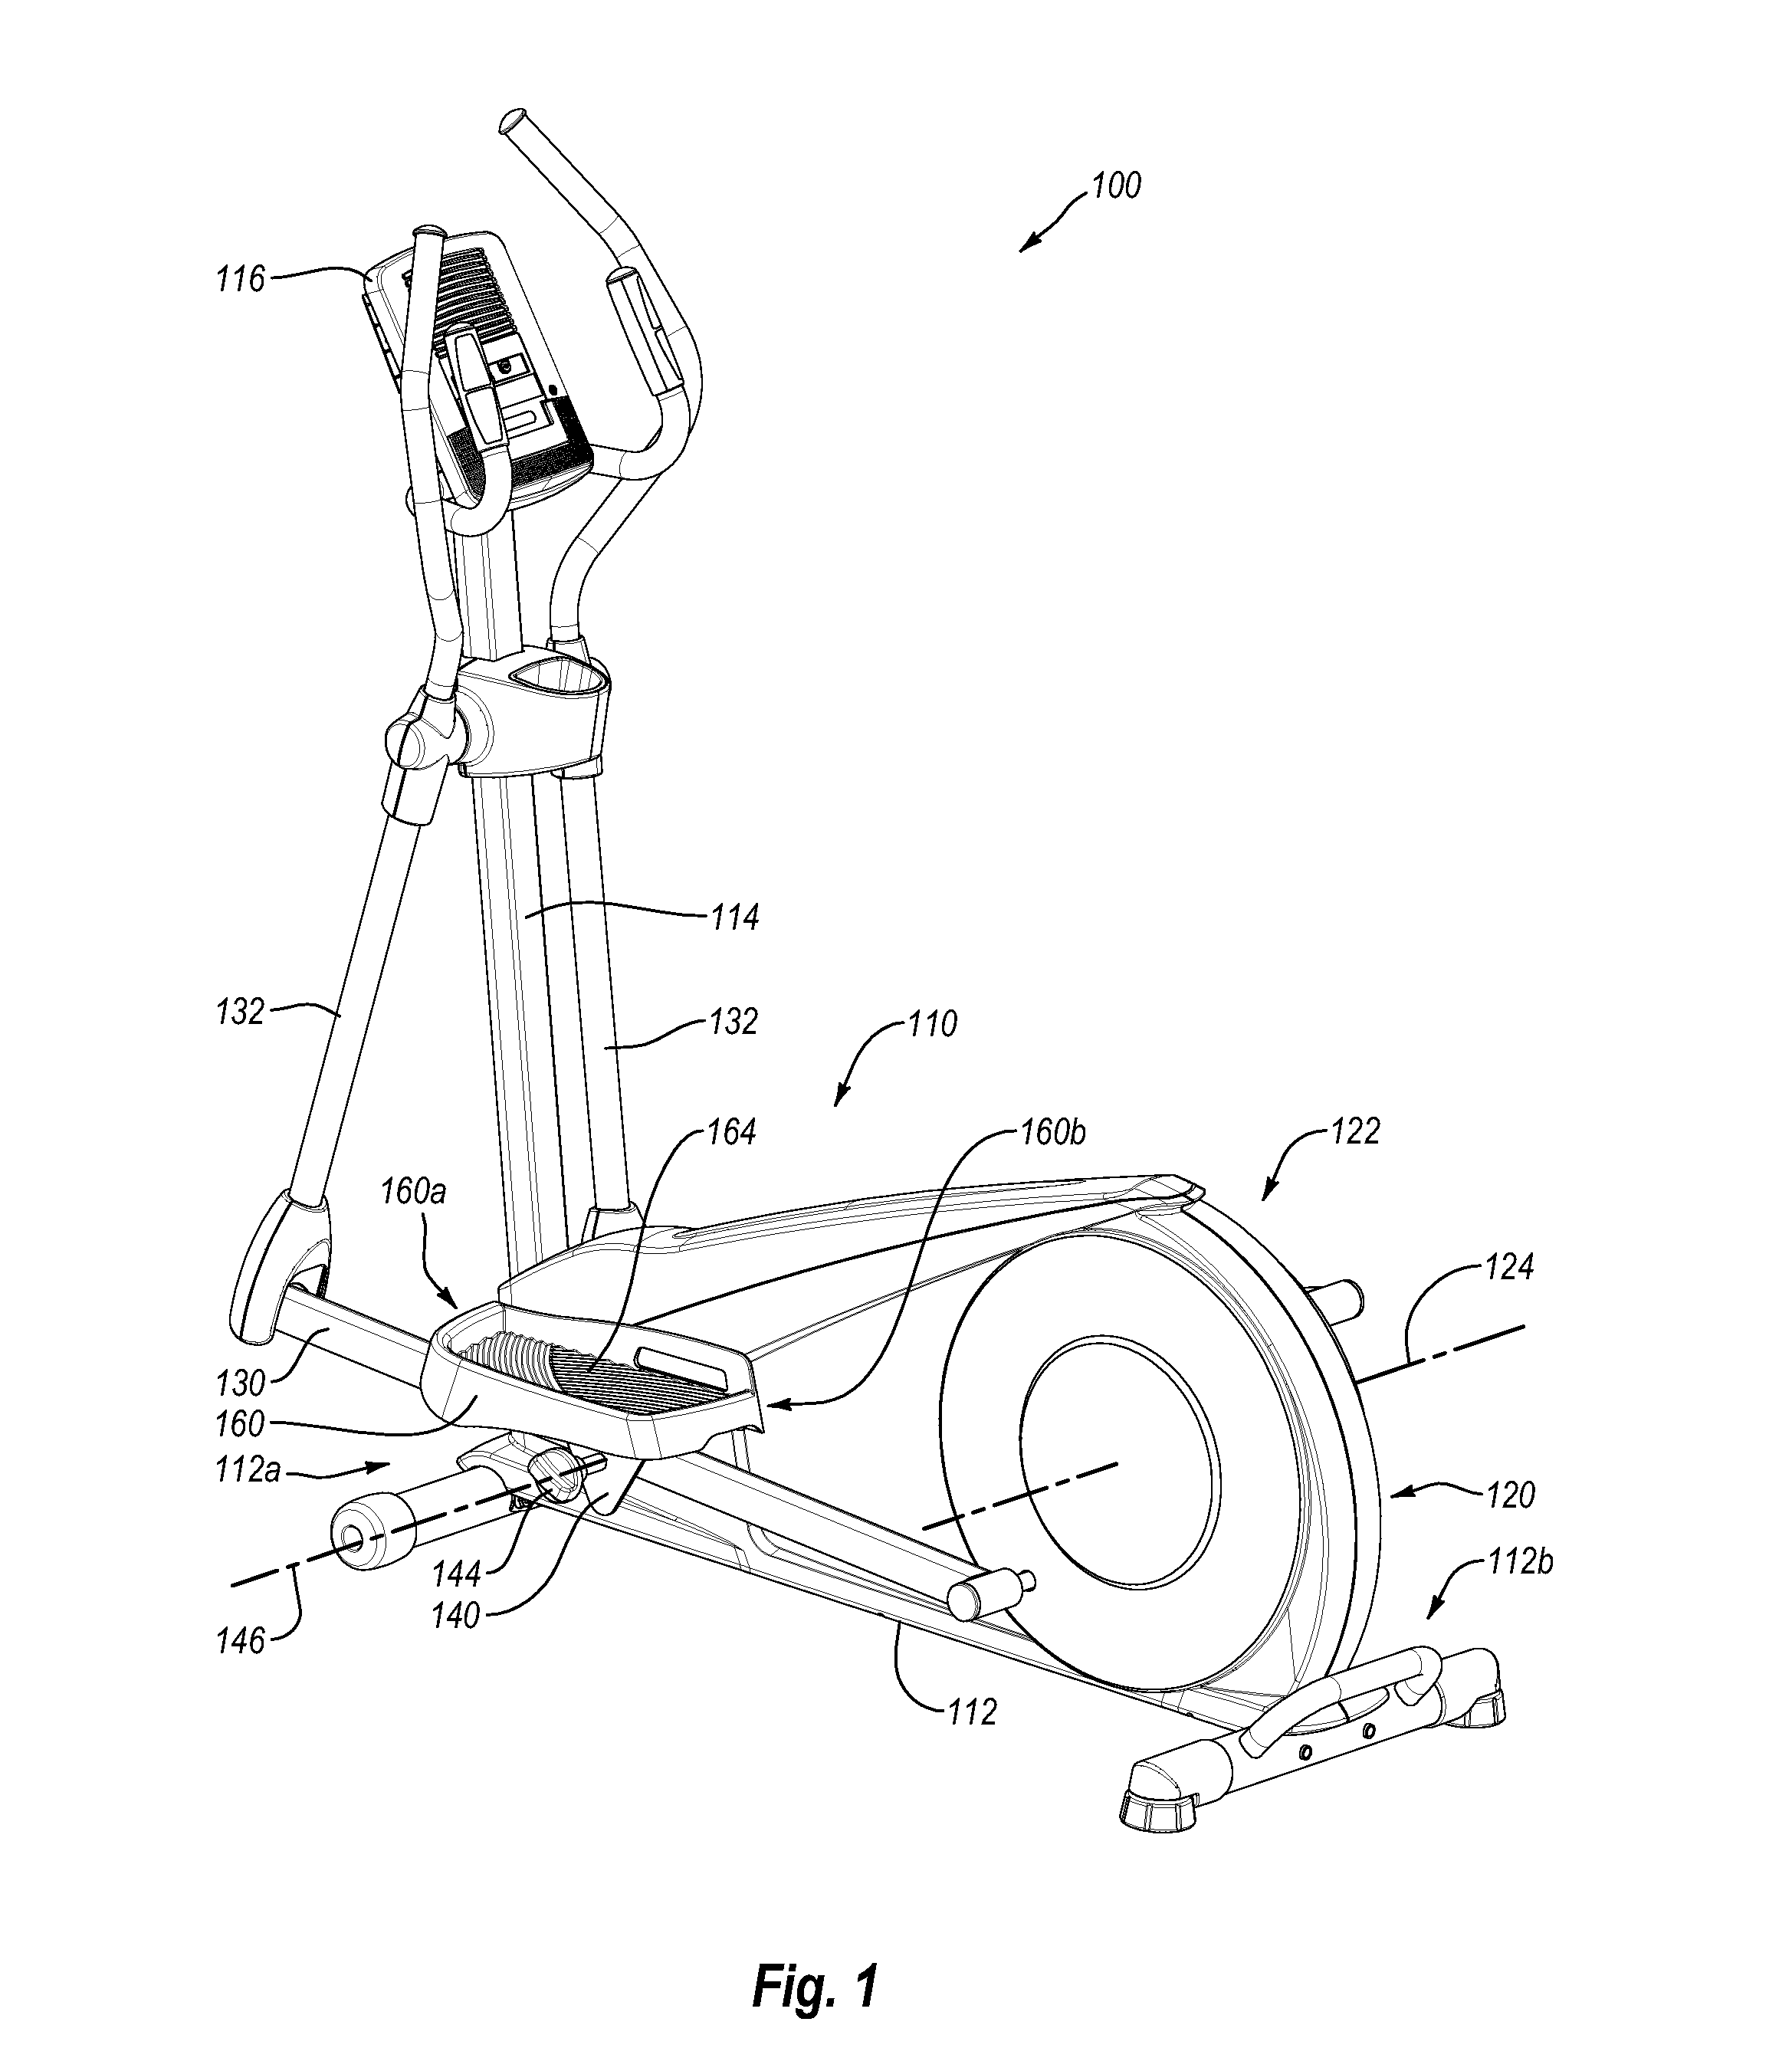 Exercise device with adjustable foot pad